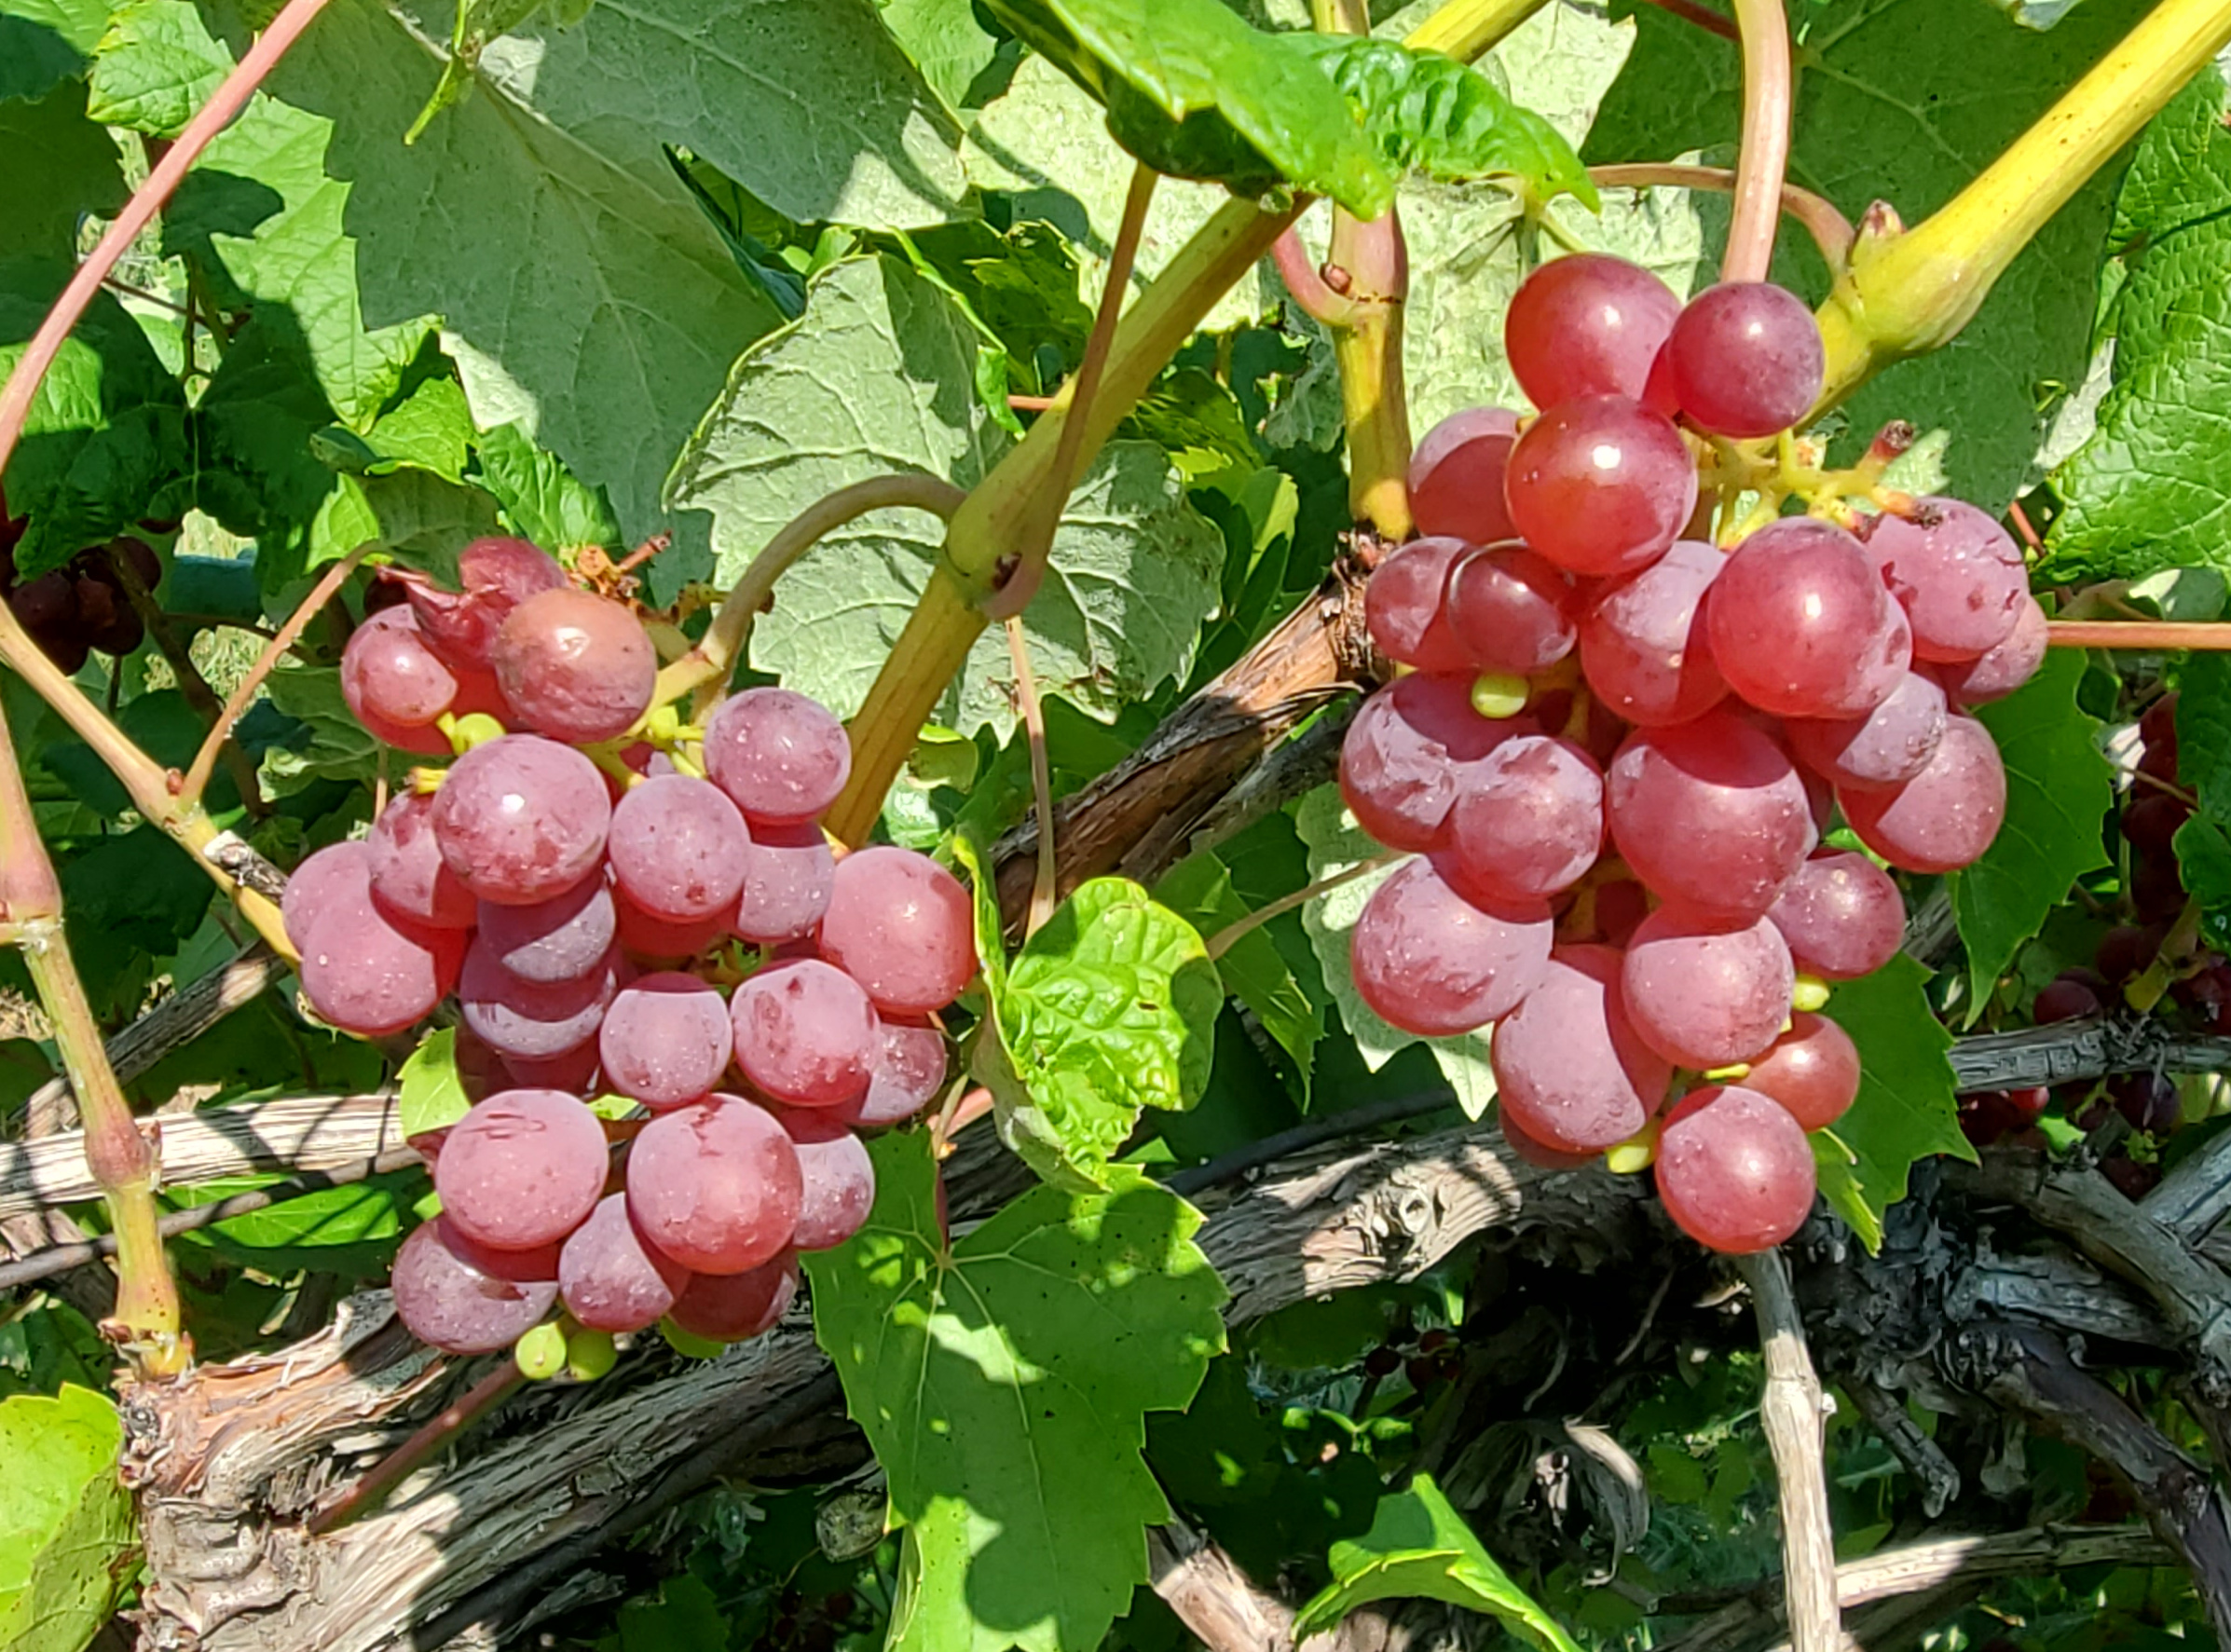 Grapes ready for harvest.